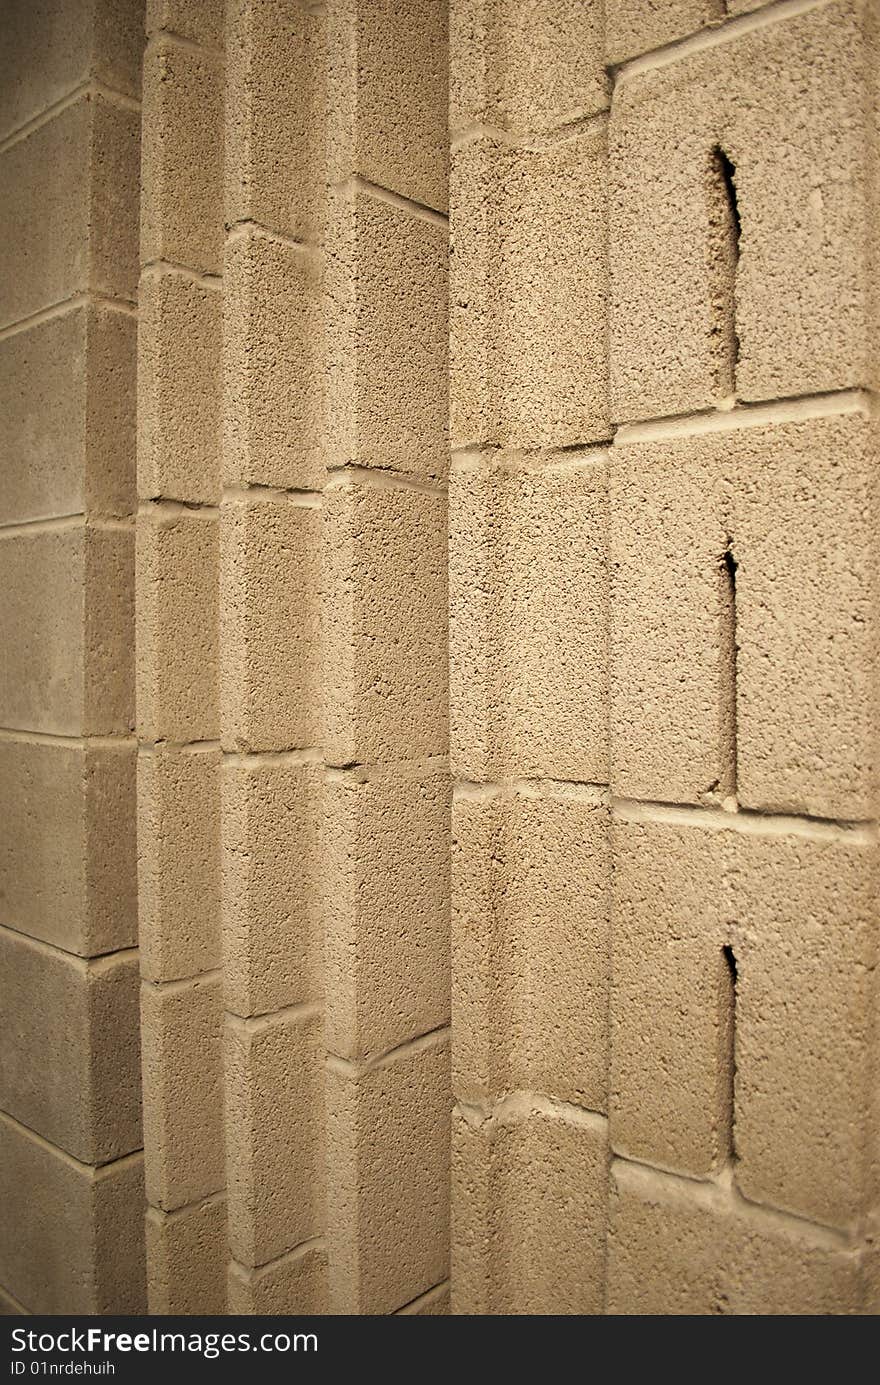 Texture of wall constructed from acoustical cinder block